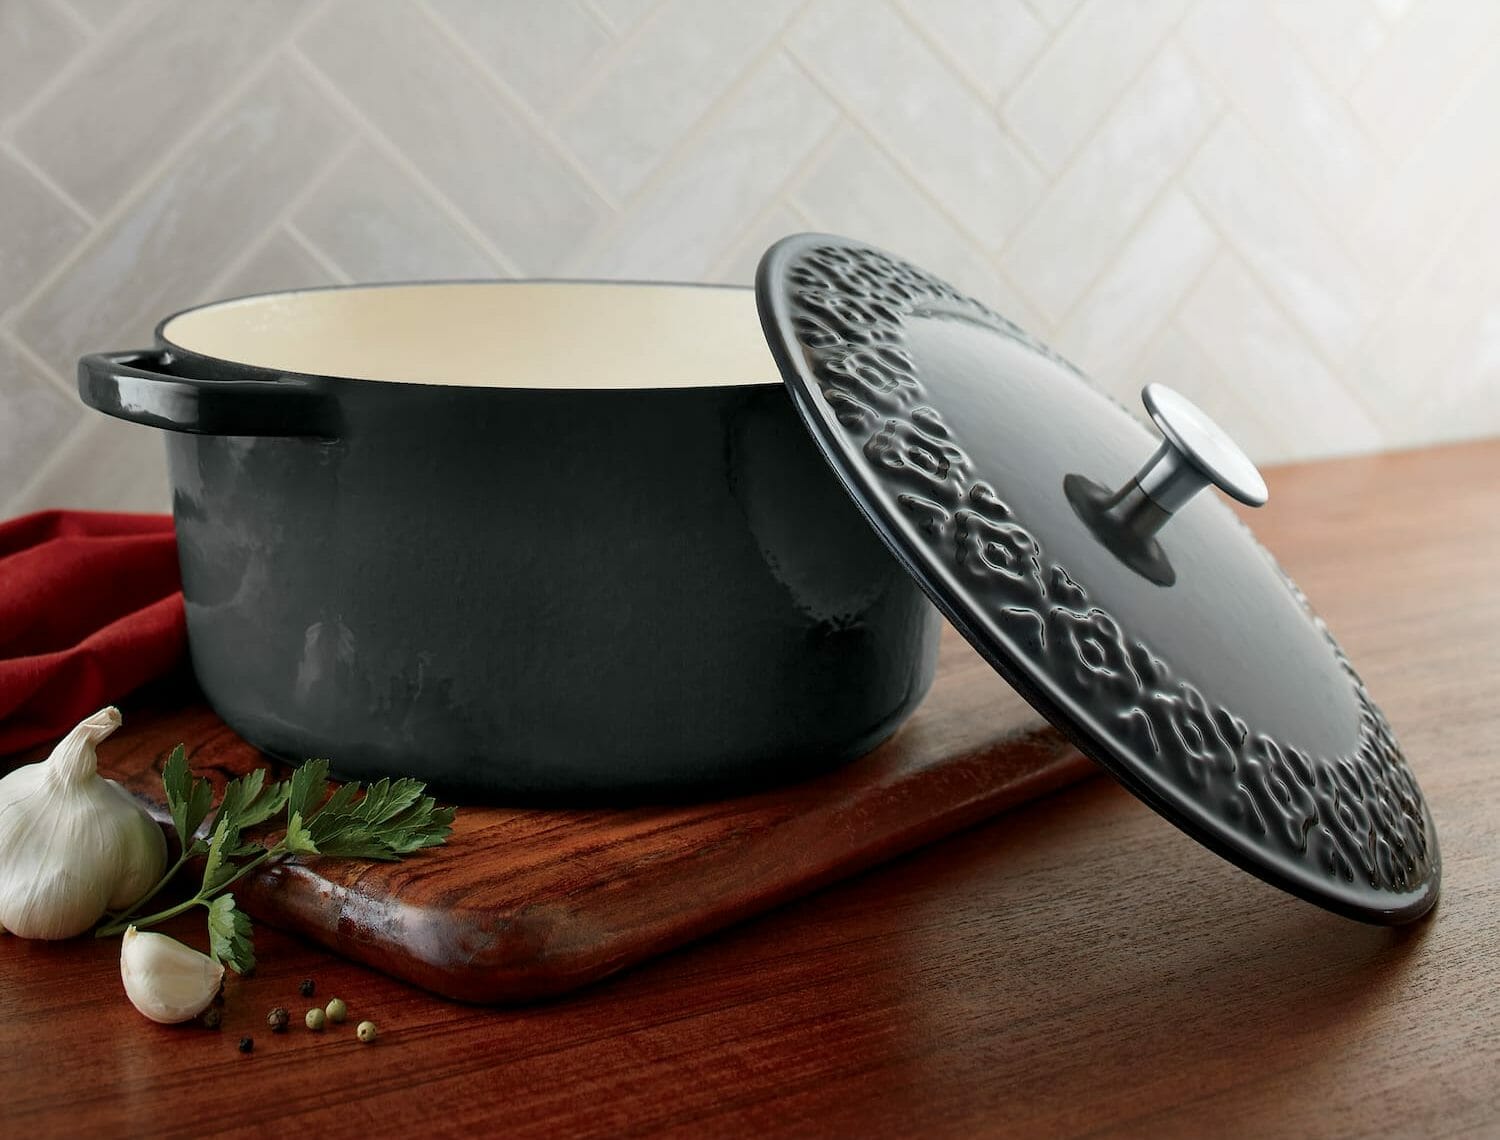 Cook up and serve up your specialties—with style! Stock pot is enamel on cast iron, with embossed lid and stainless-steel knob. Oven, stove top and dishwasher safe.